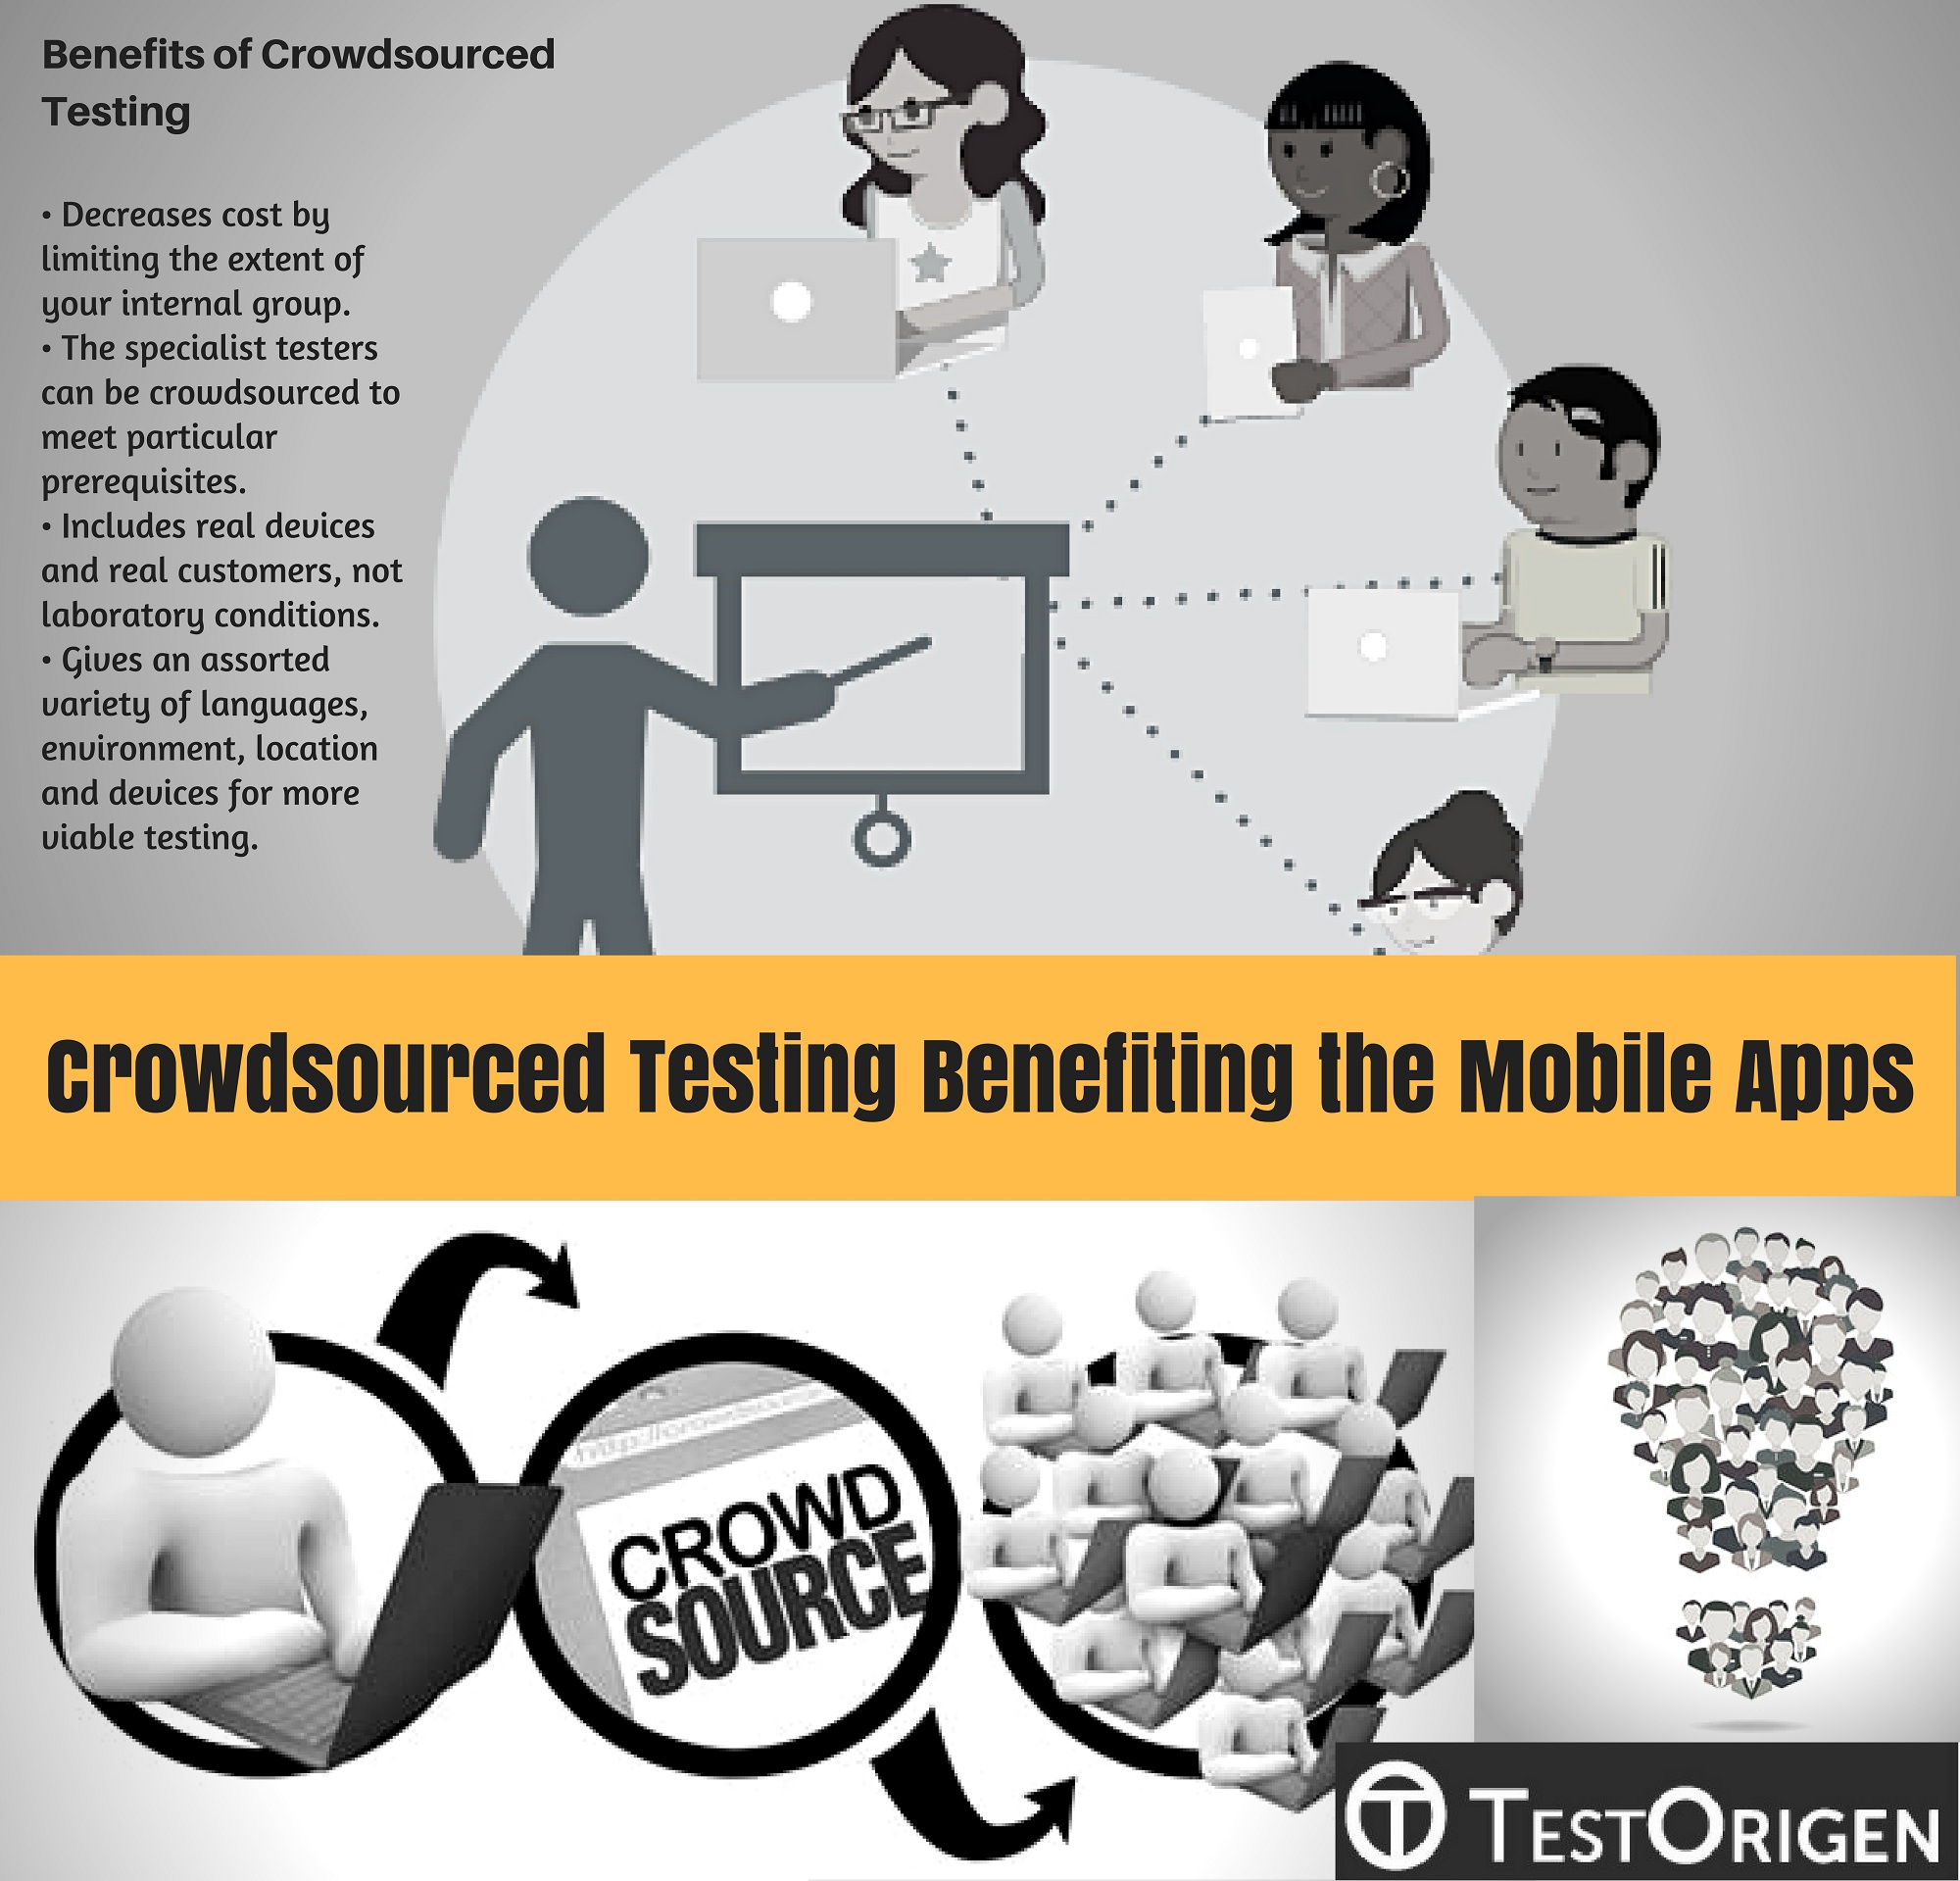 Crowdsourced Testing Benefiting the Mobile Apps